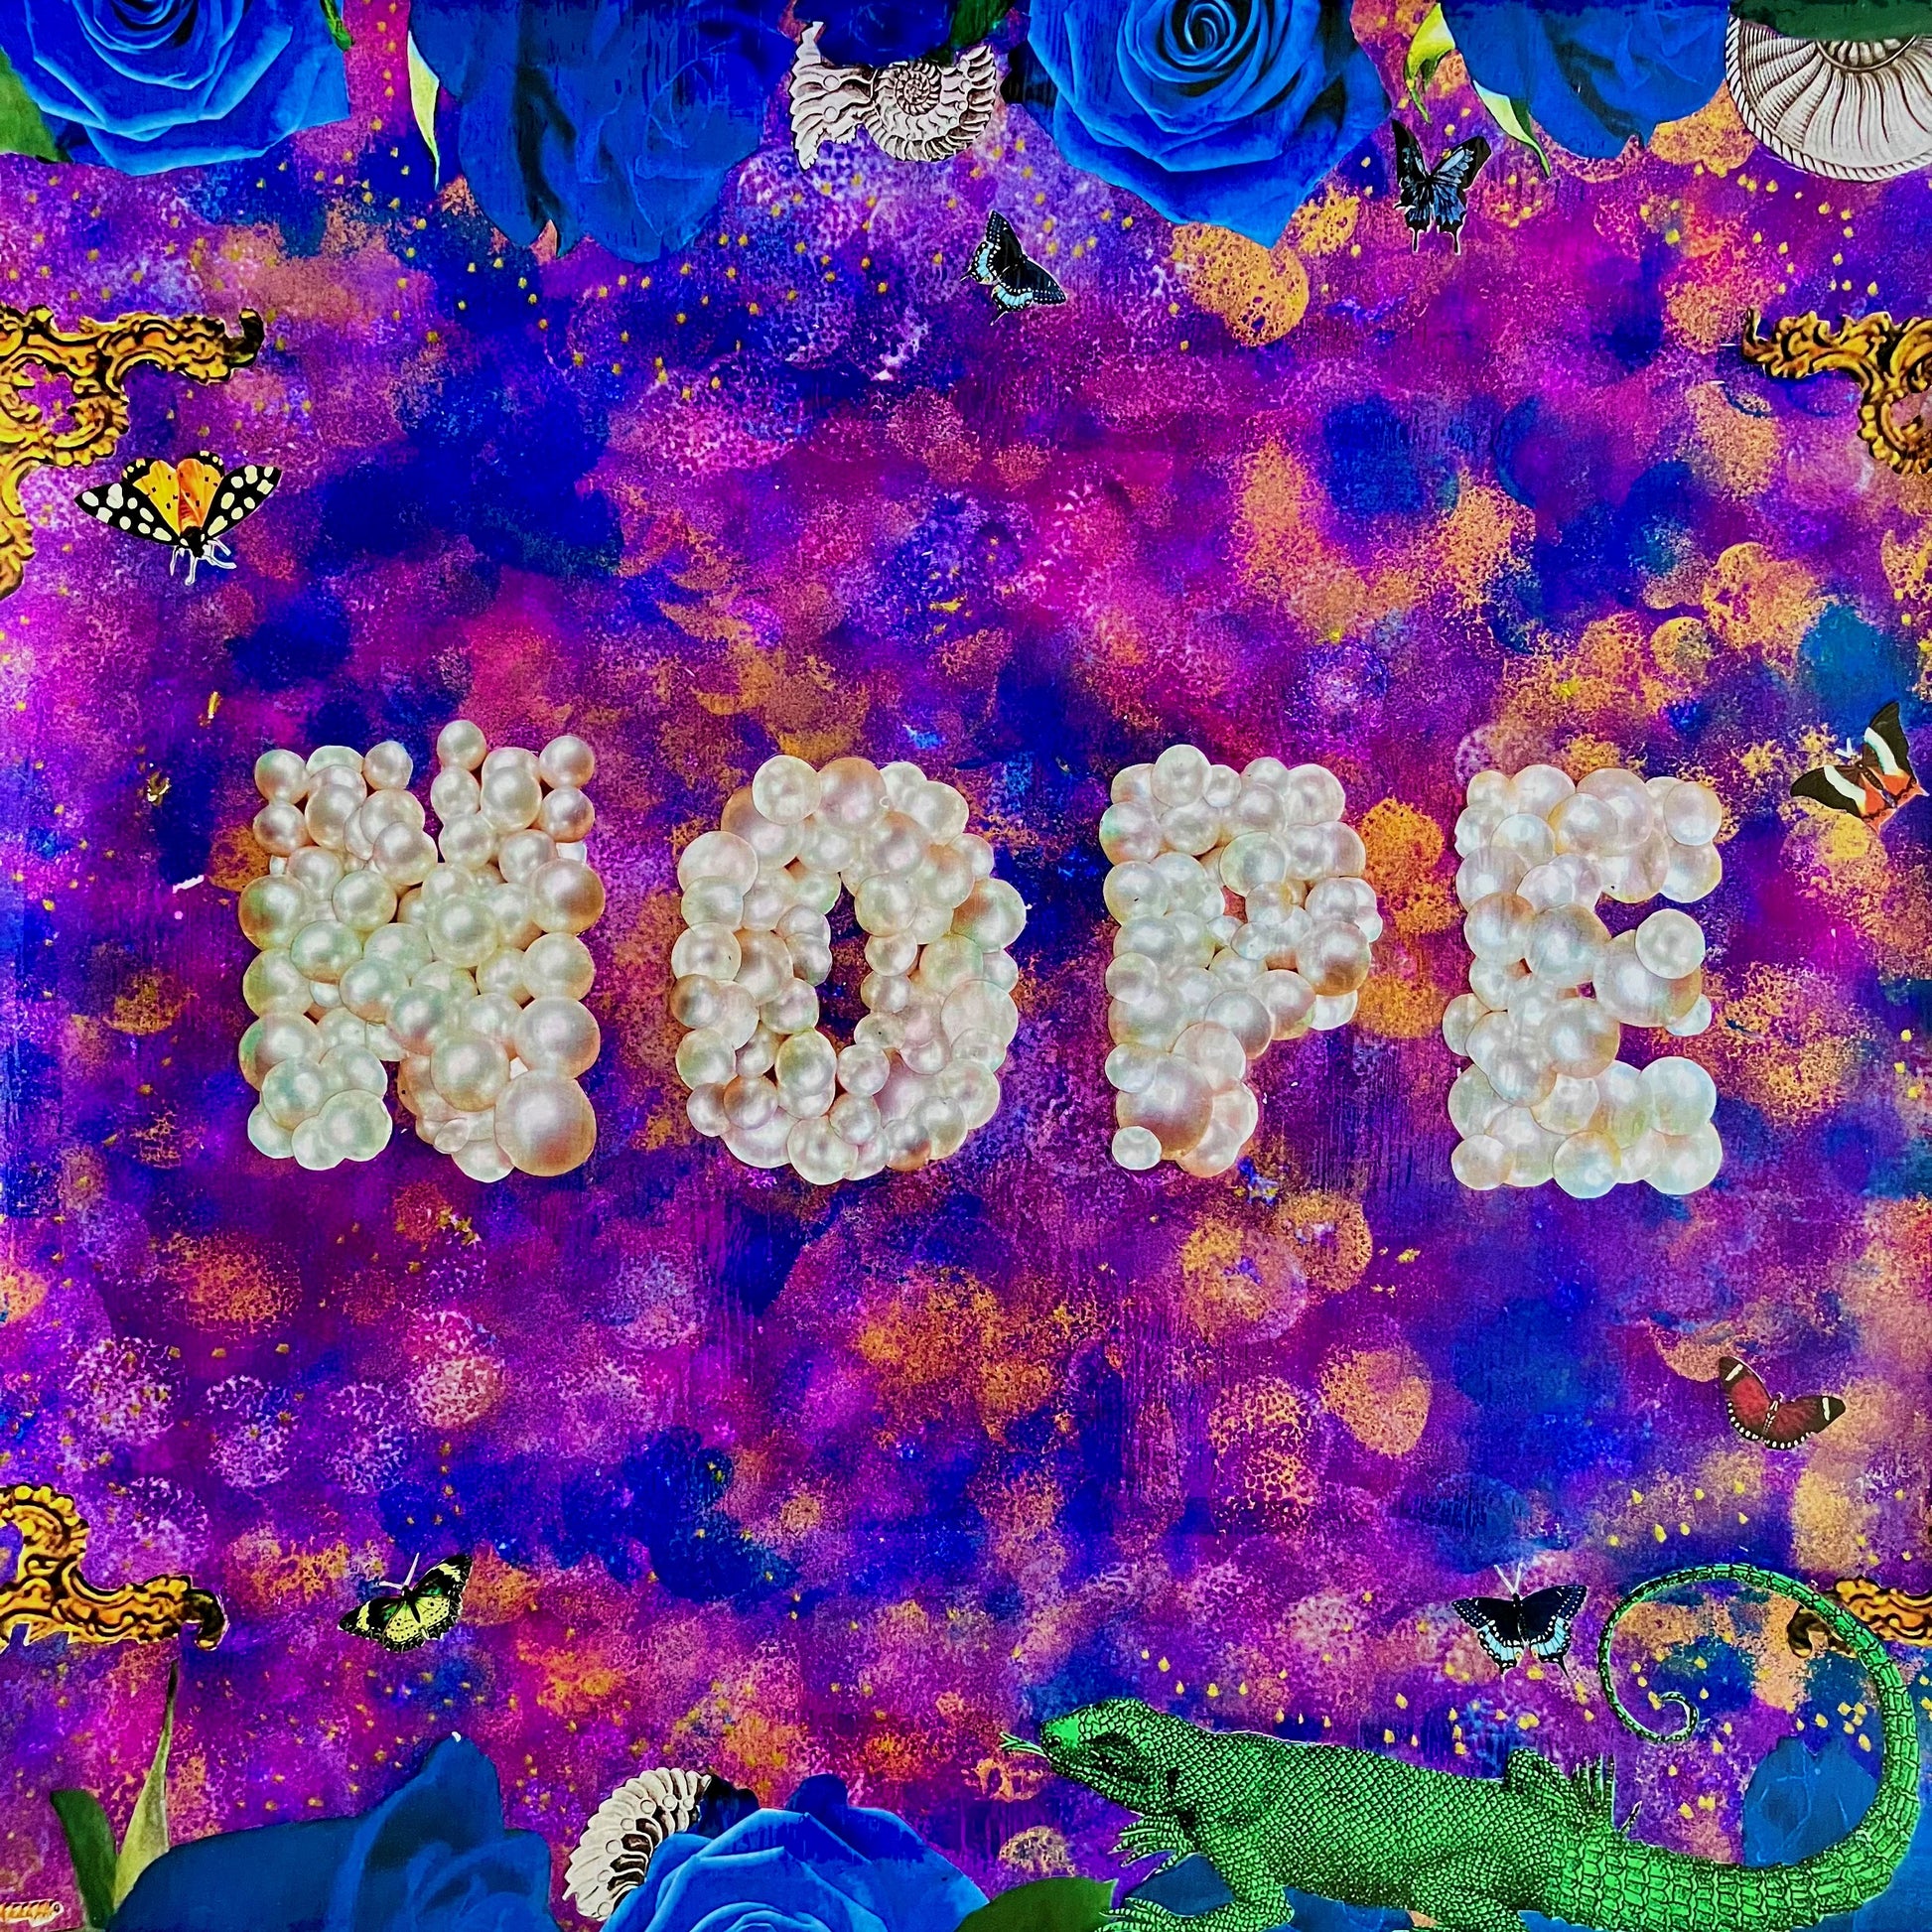 "Nope" Wall Plate by House of Frisson. Featuring the word "nope" written with pearls, framed by blue roses, shells, moths, and a lizard, on a  purple, blue and golden background. Closeup details showing the word "nope" formed by pearls.